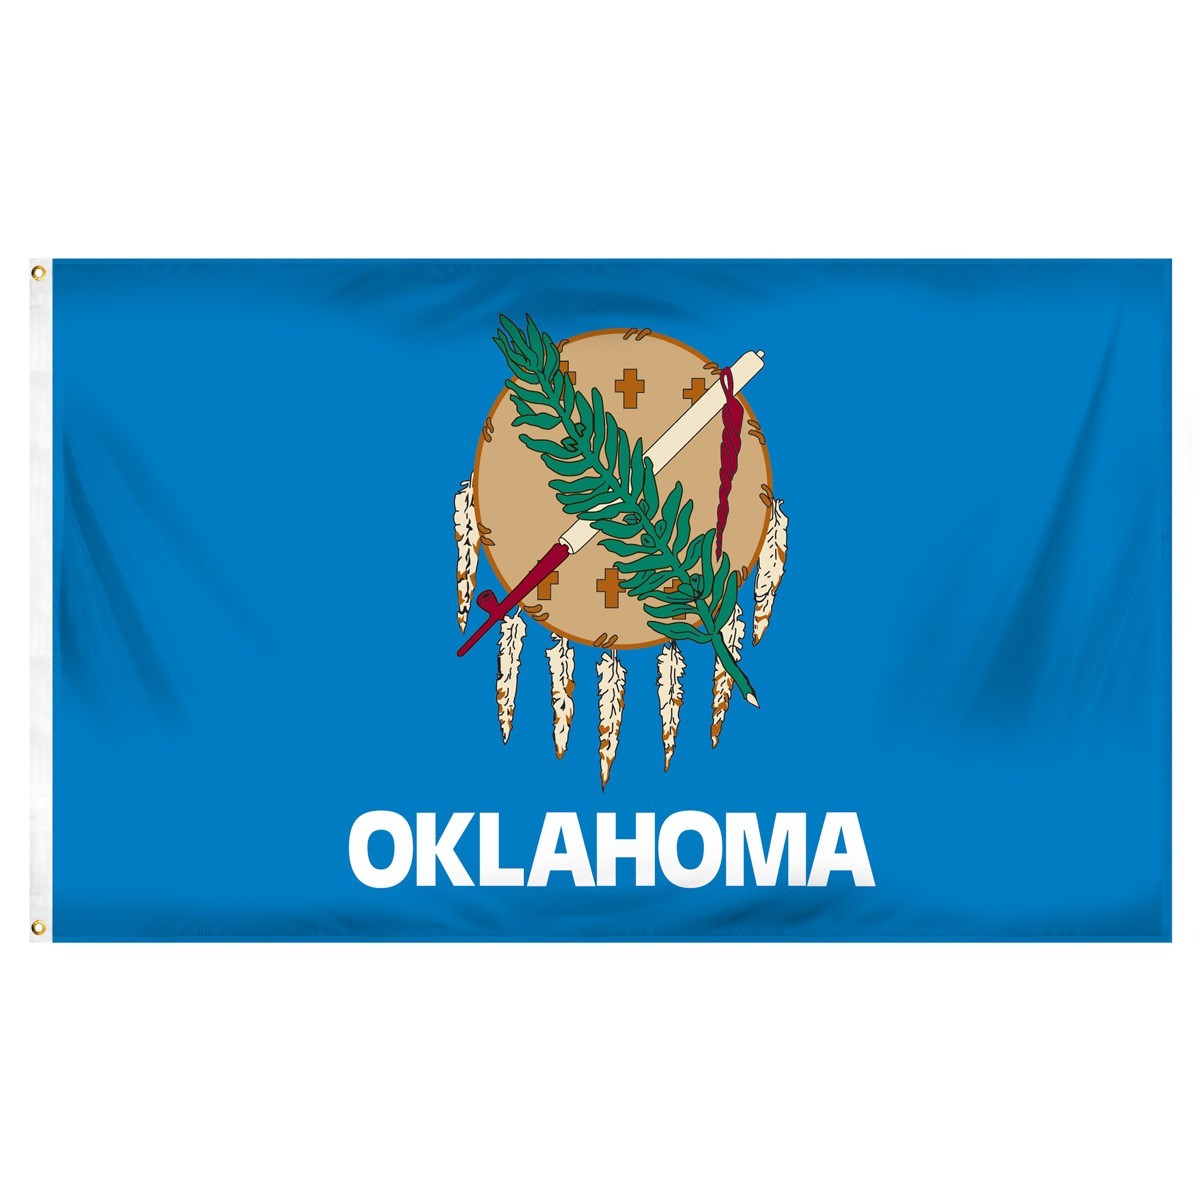 Oklahoma state flags for sale